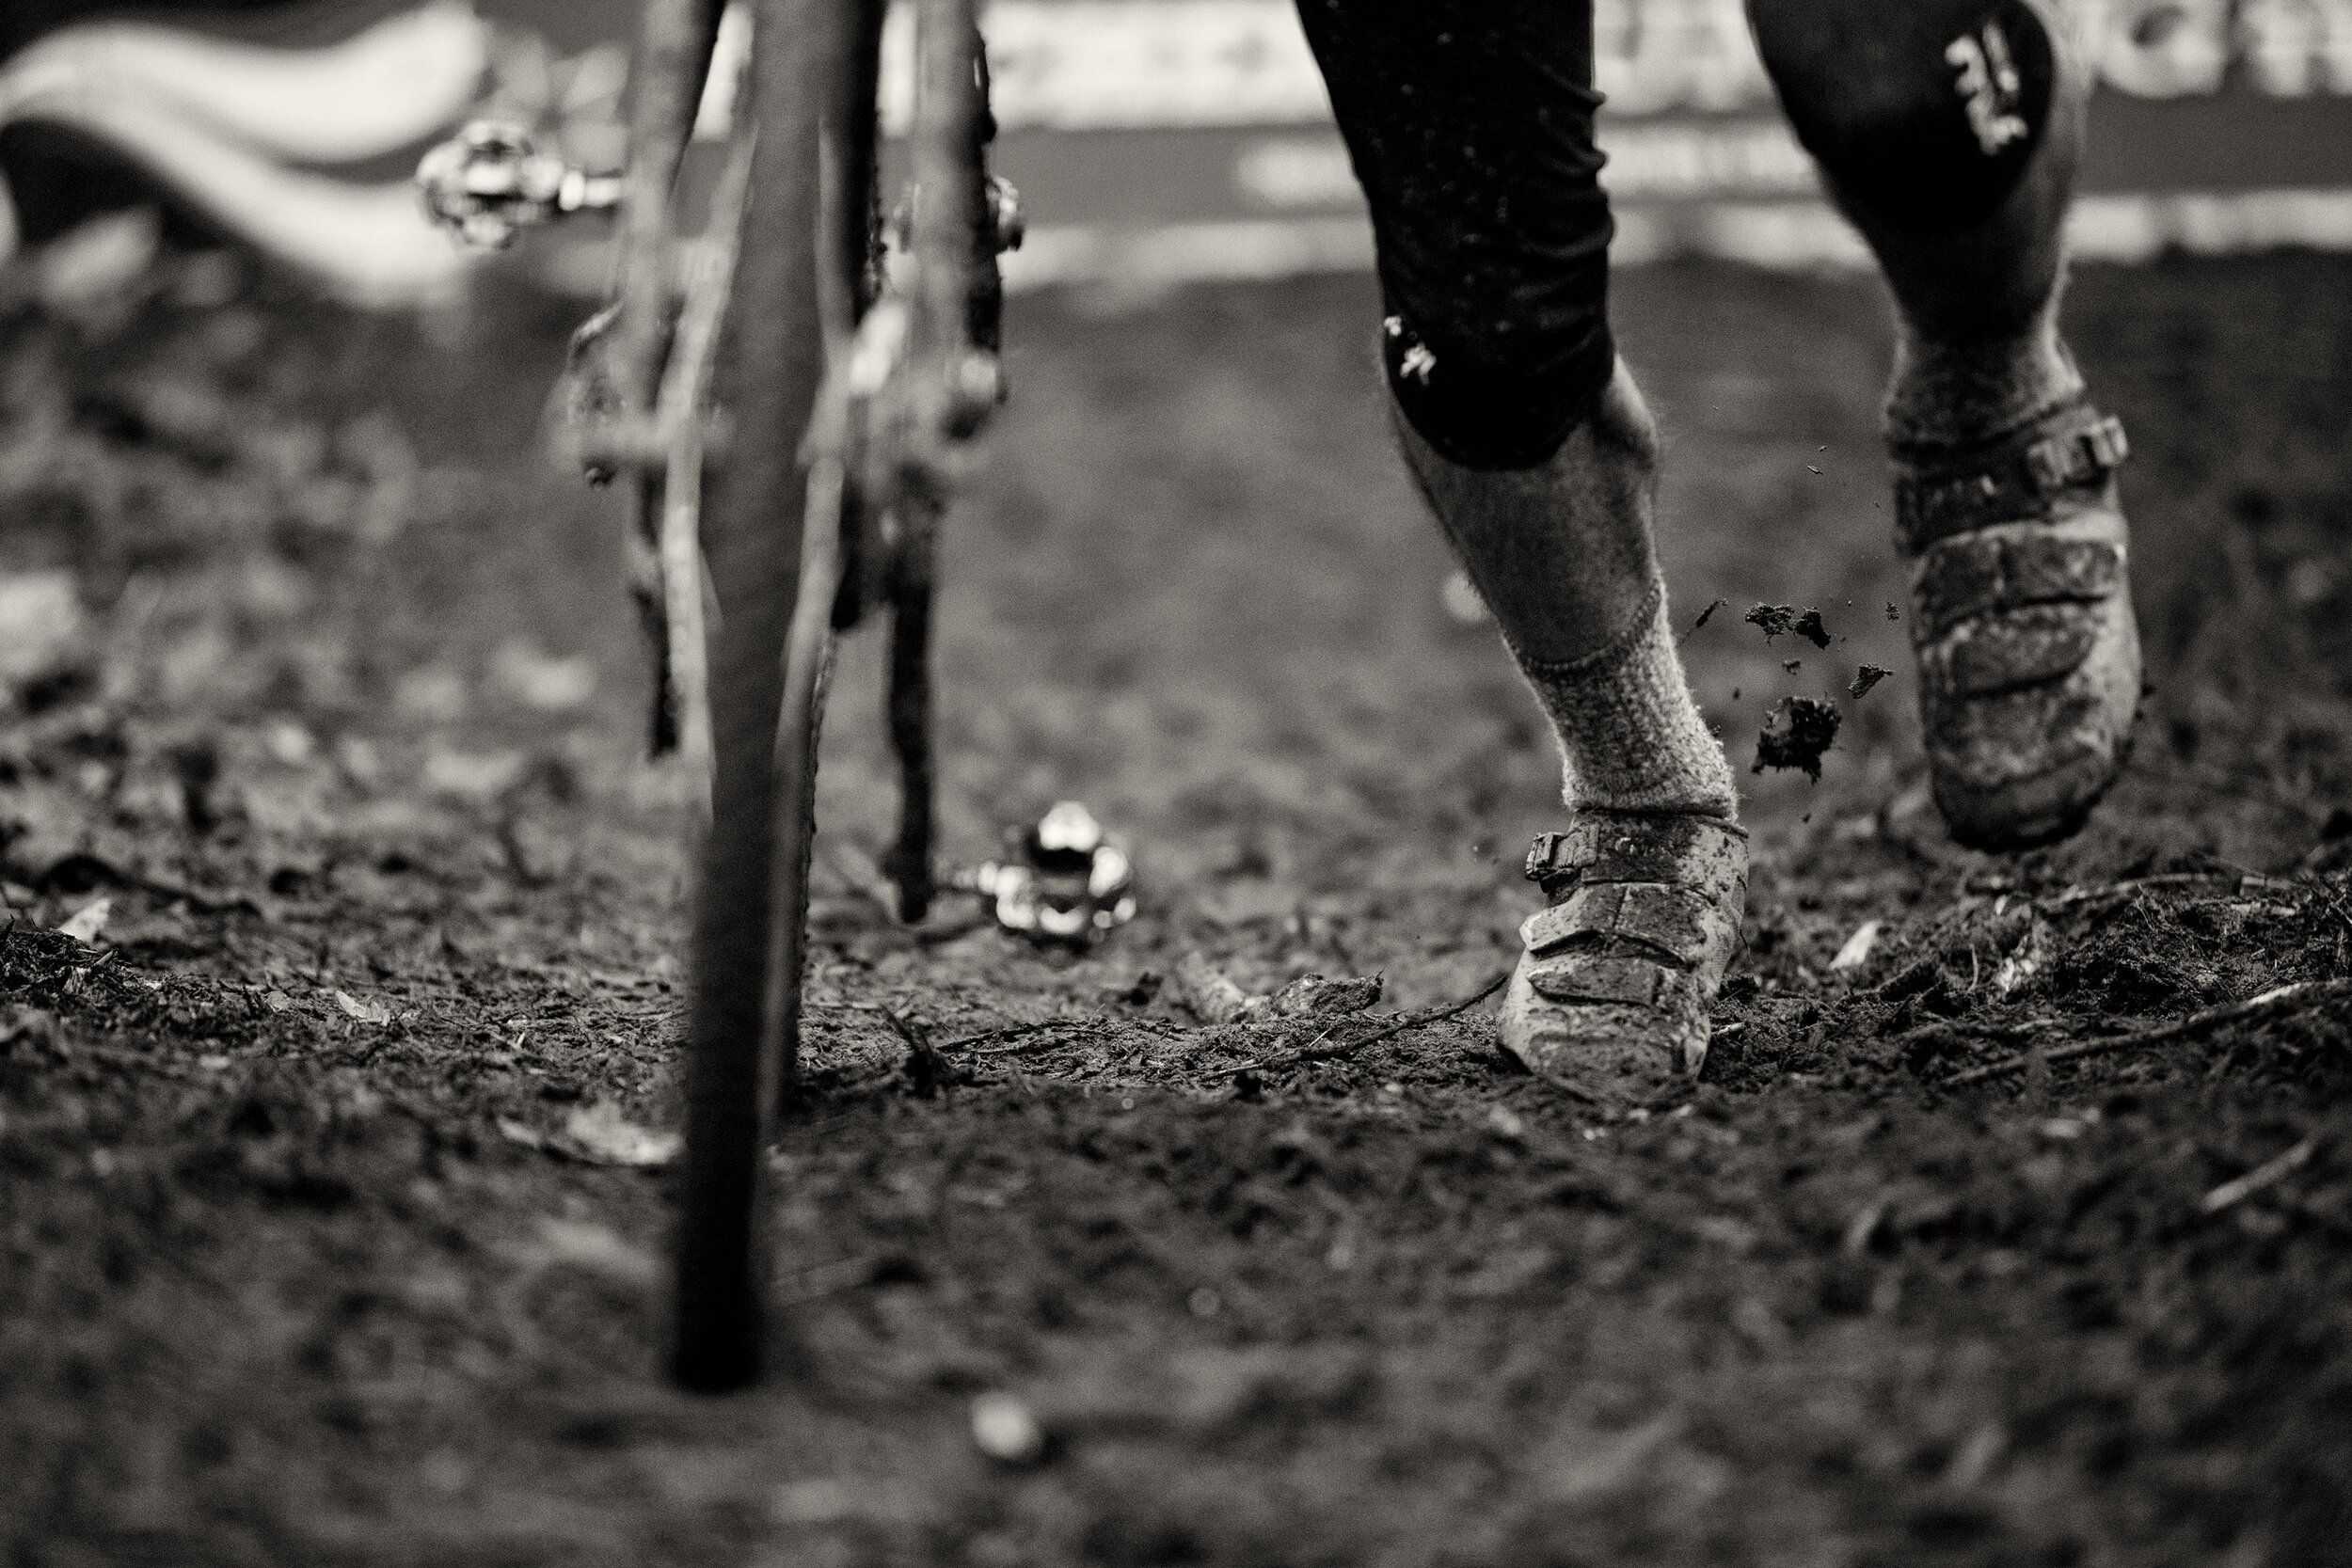  Competition: Cyclocross racers during a race on a rainy day at Woodland Park, Seattle, Washington 